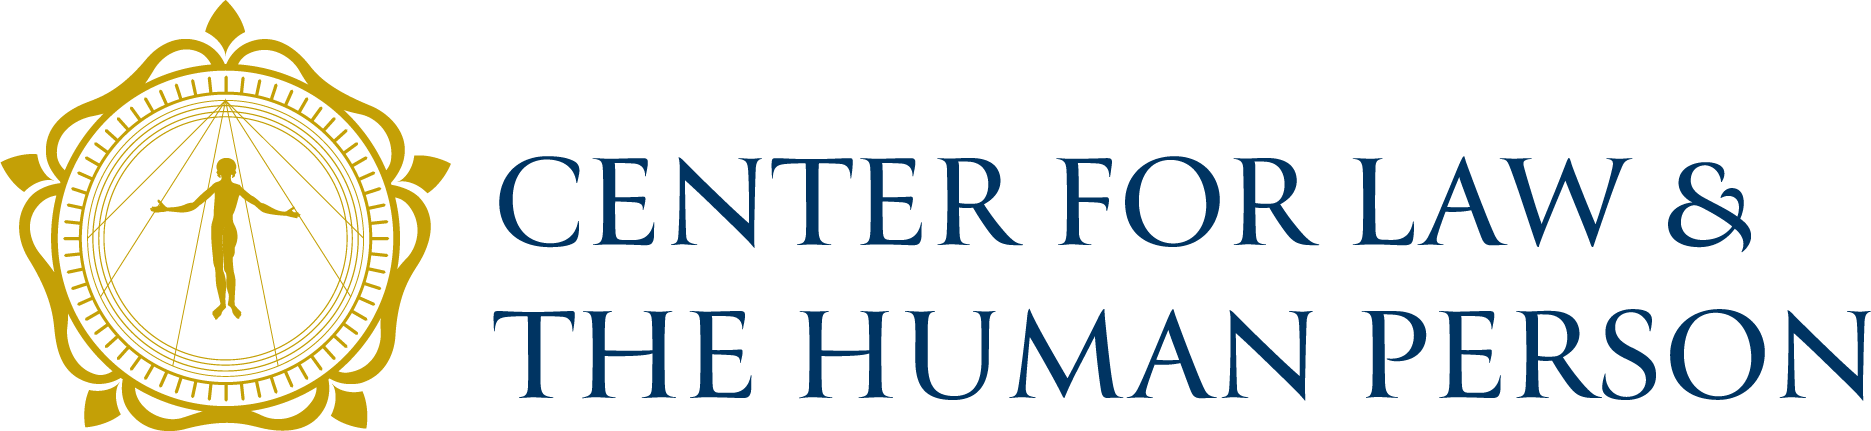 Center for Law and the Human Person logo